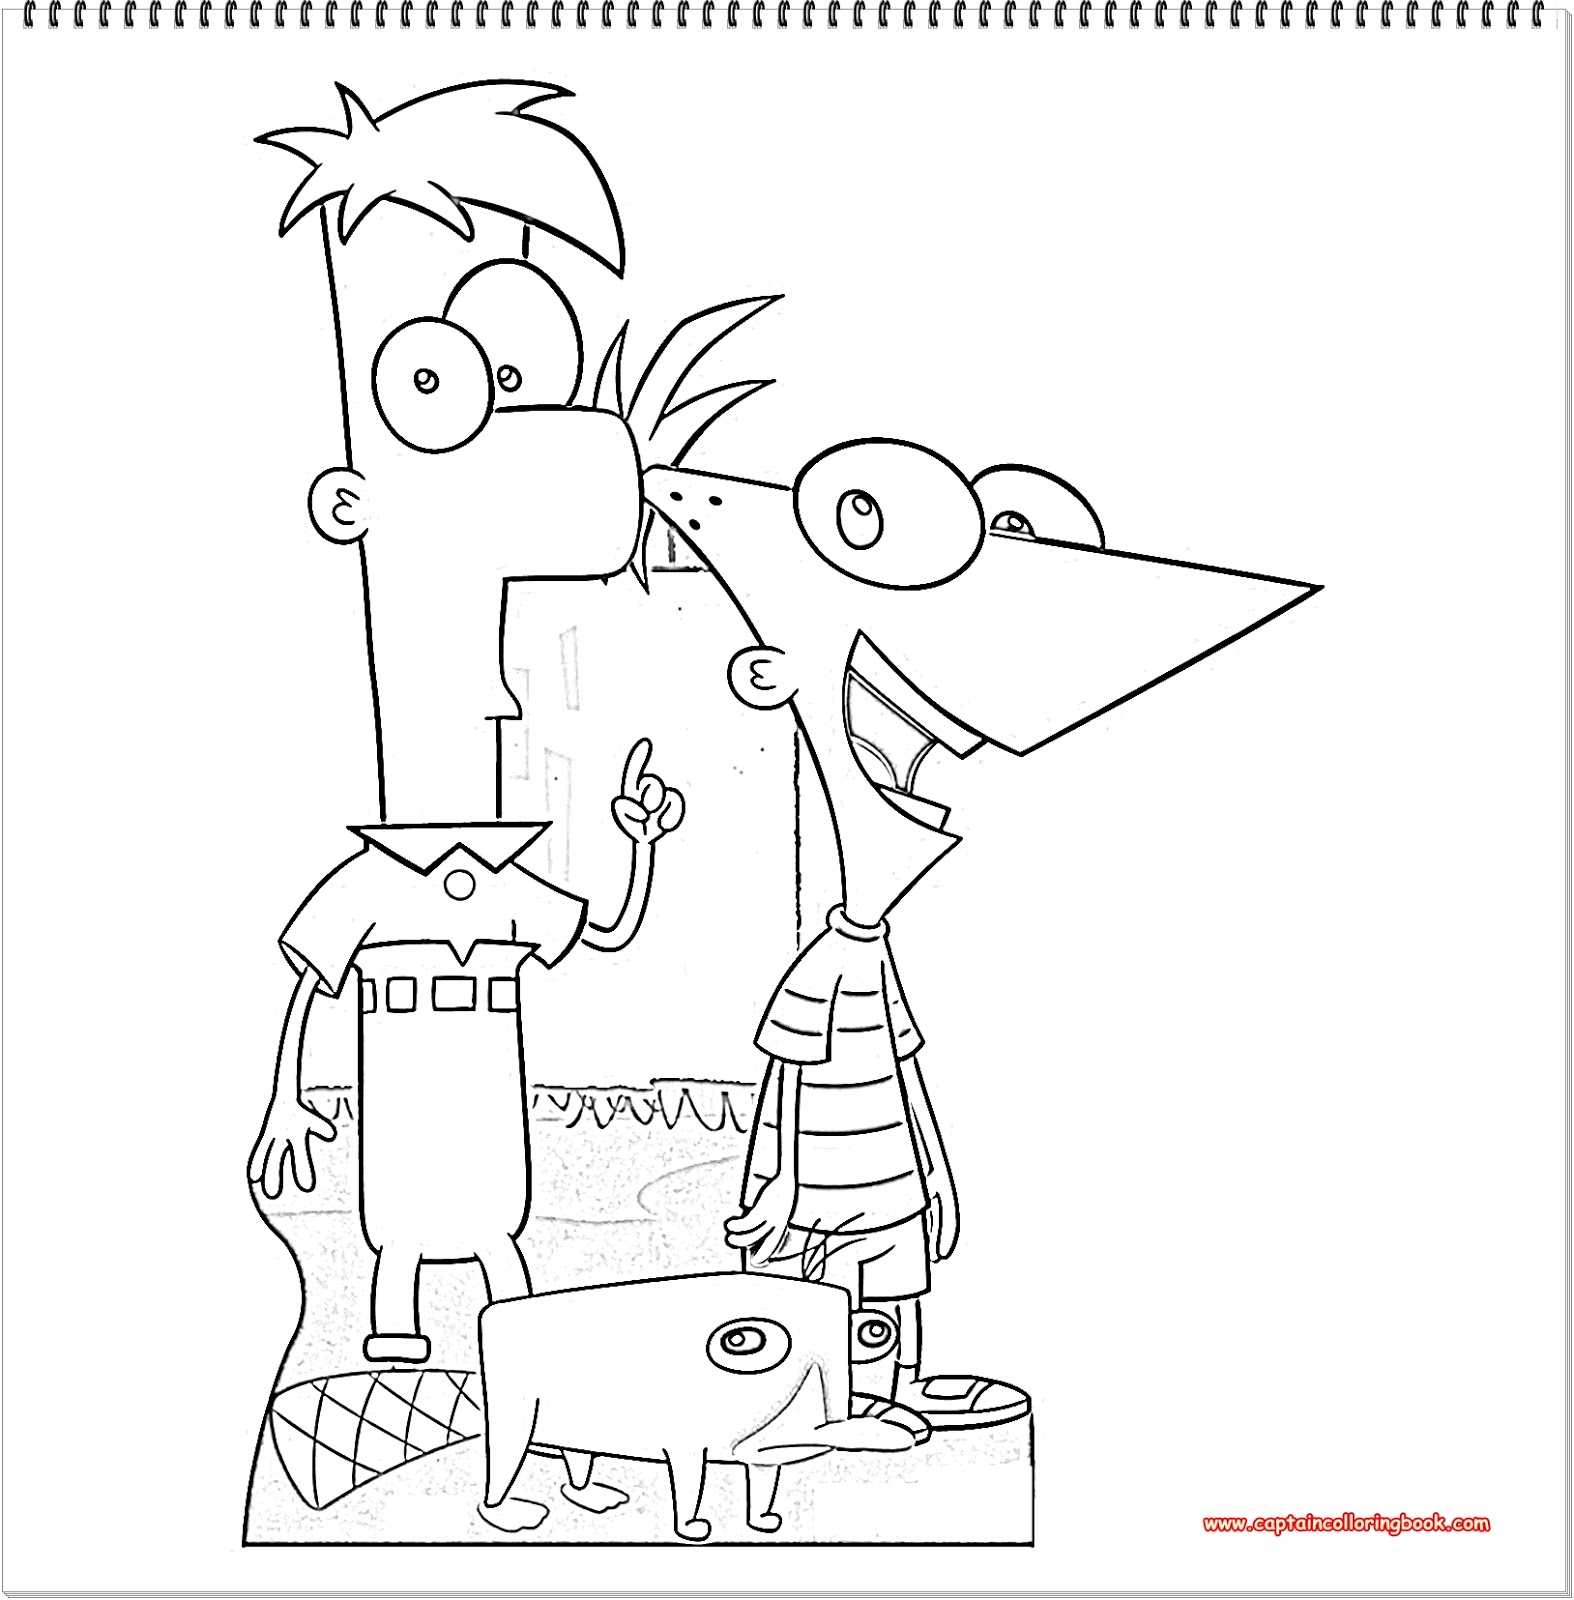 Phineas And Ferb Coloring Page Free Printable